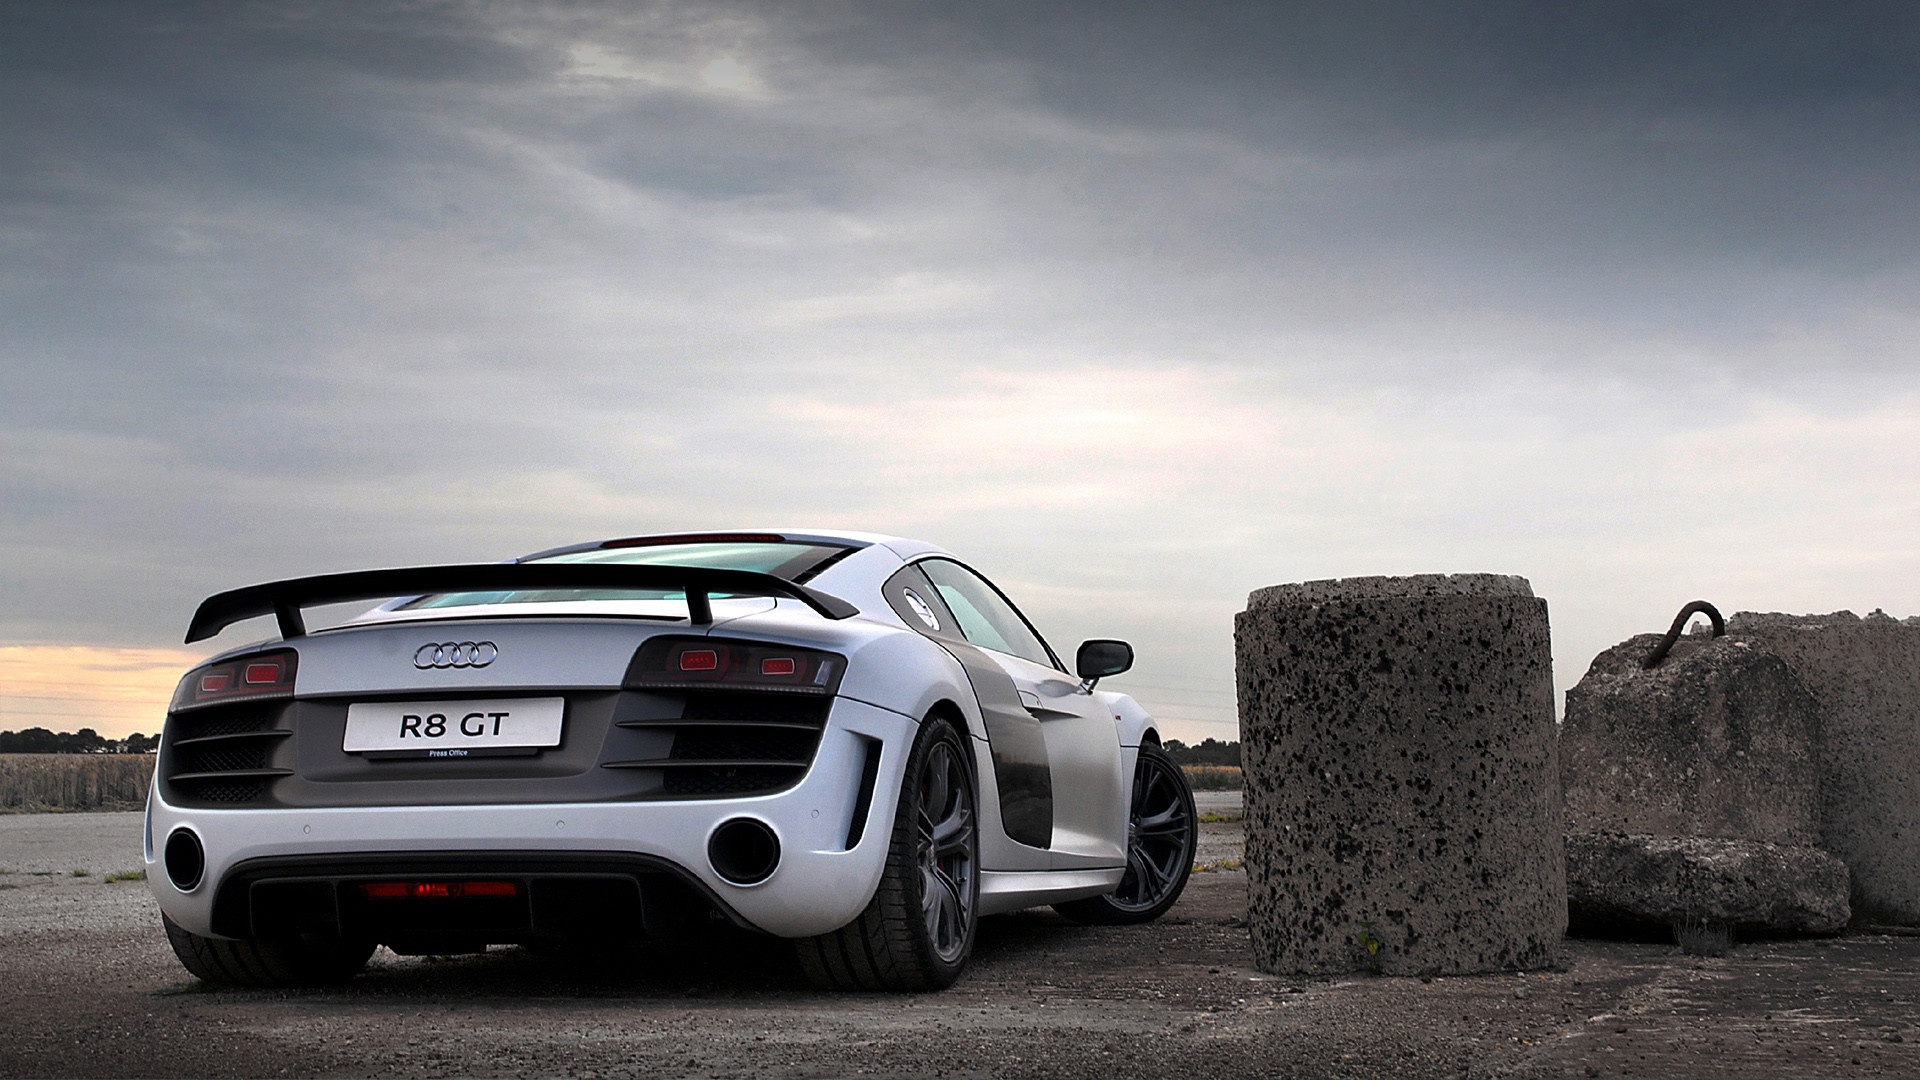 Audi R8 background picture